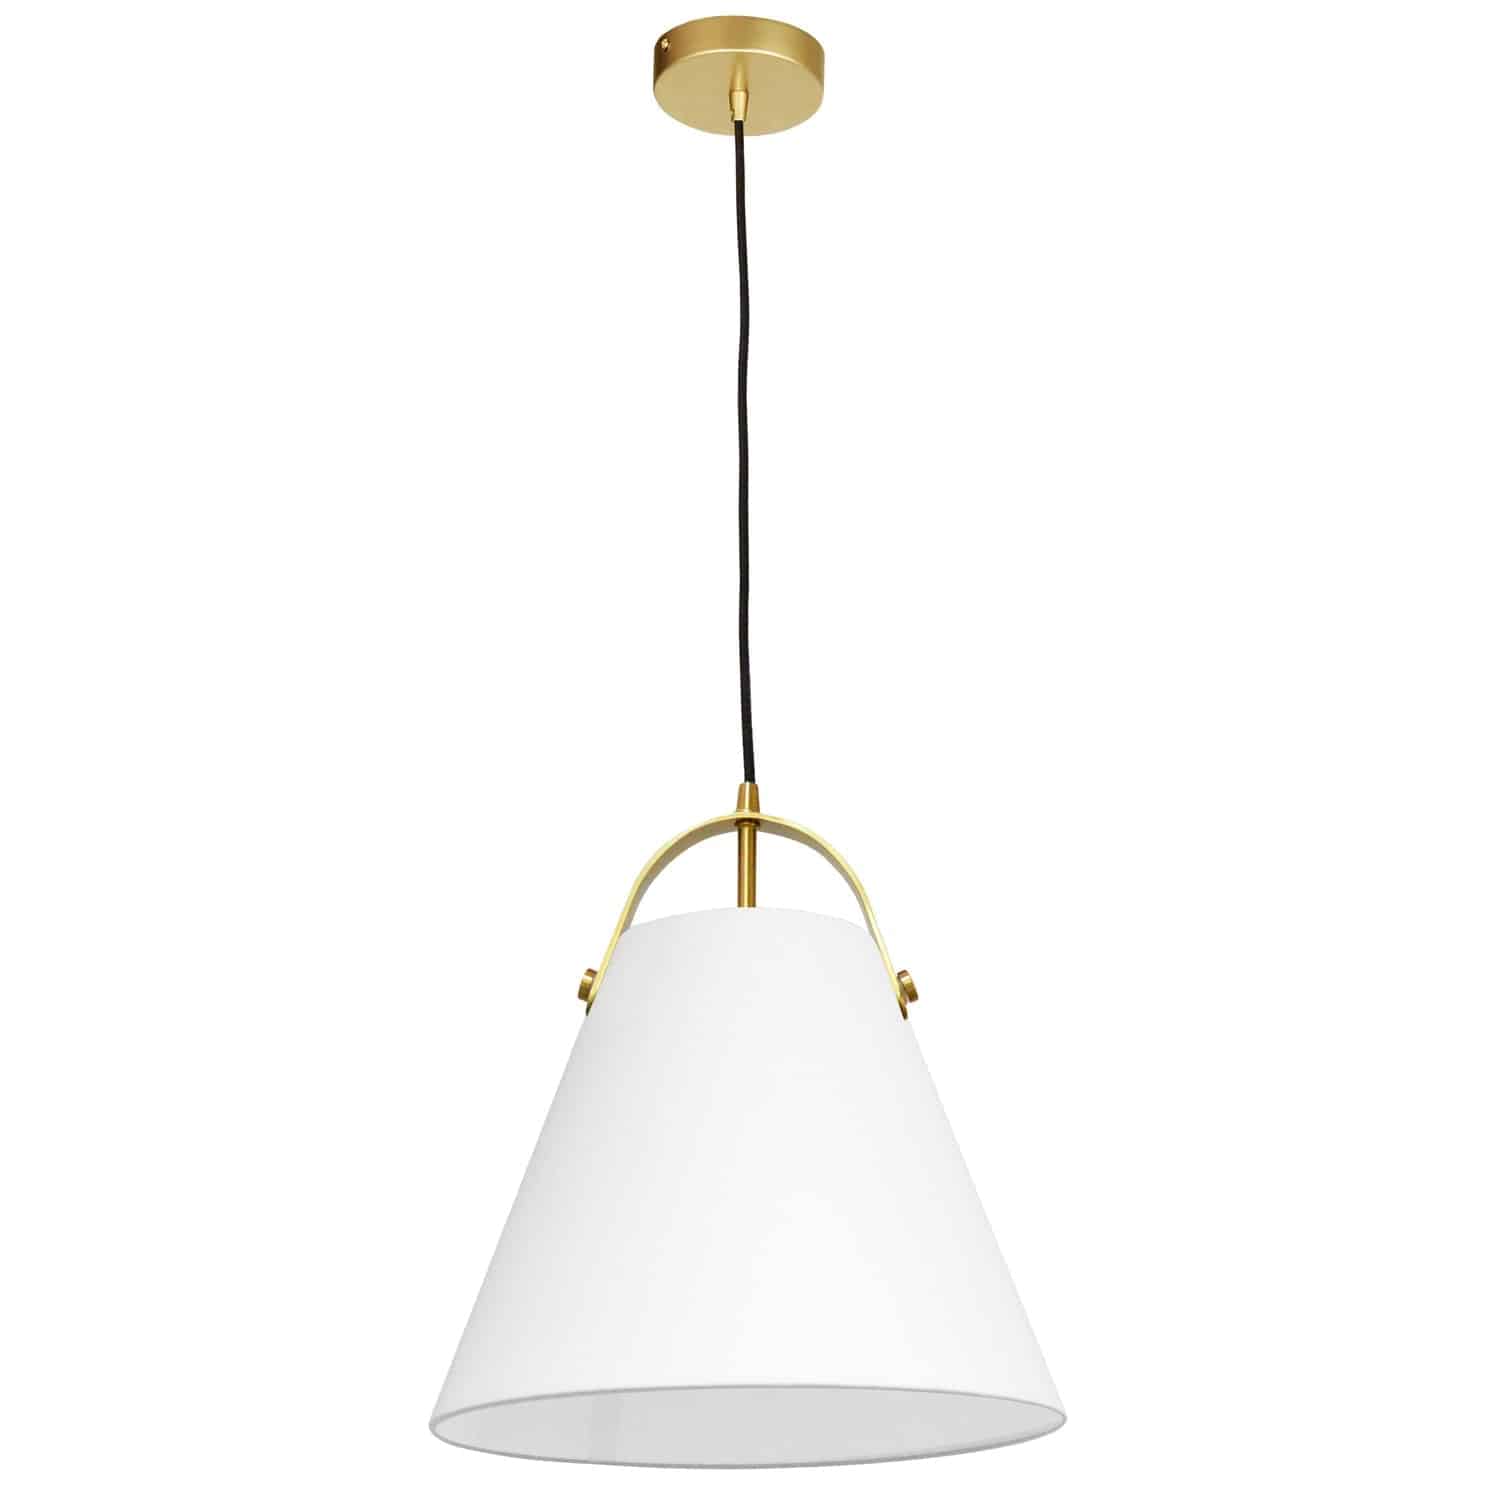 The Emperor family of lighting makes a clear statement about your sense of style. Its tapered silhouette creates a versatile look that can work with any contemporary furnishings. The metal frame drops to a bell style fabric shade. The two basic elements are joined by a curved metal design element on the top side of the shade that draws the eye, and gives Emperor lighting its distinctive profile. Emperor lighting will enhance your décor in a stylish kitchen or dining room, or a main hallway in your home.